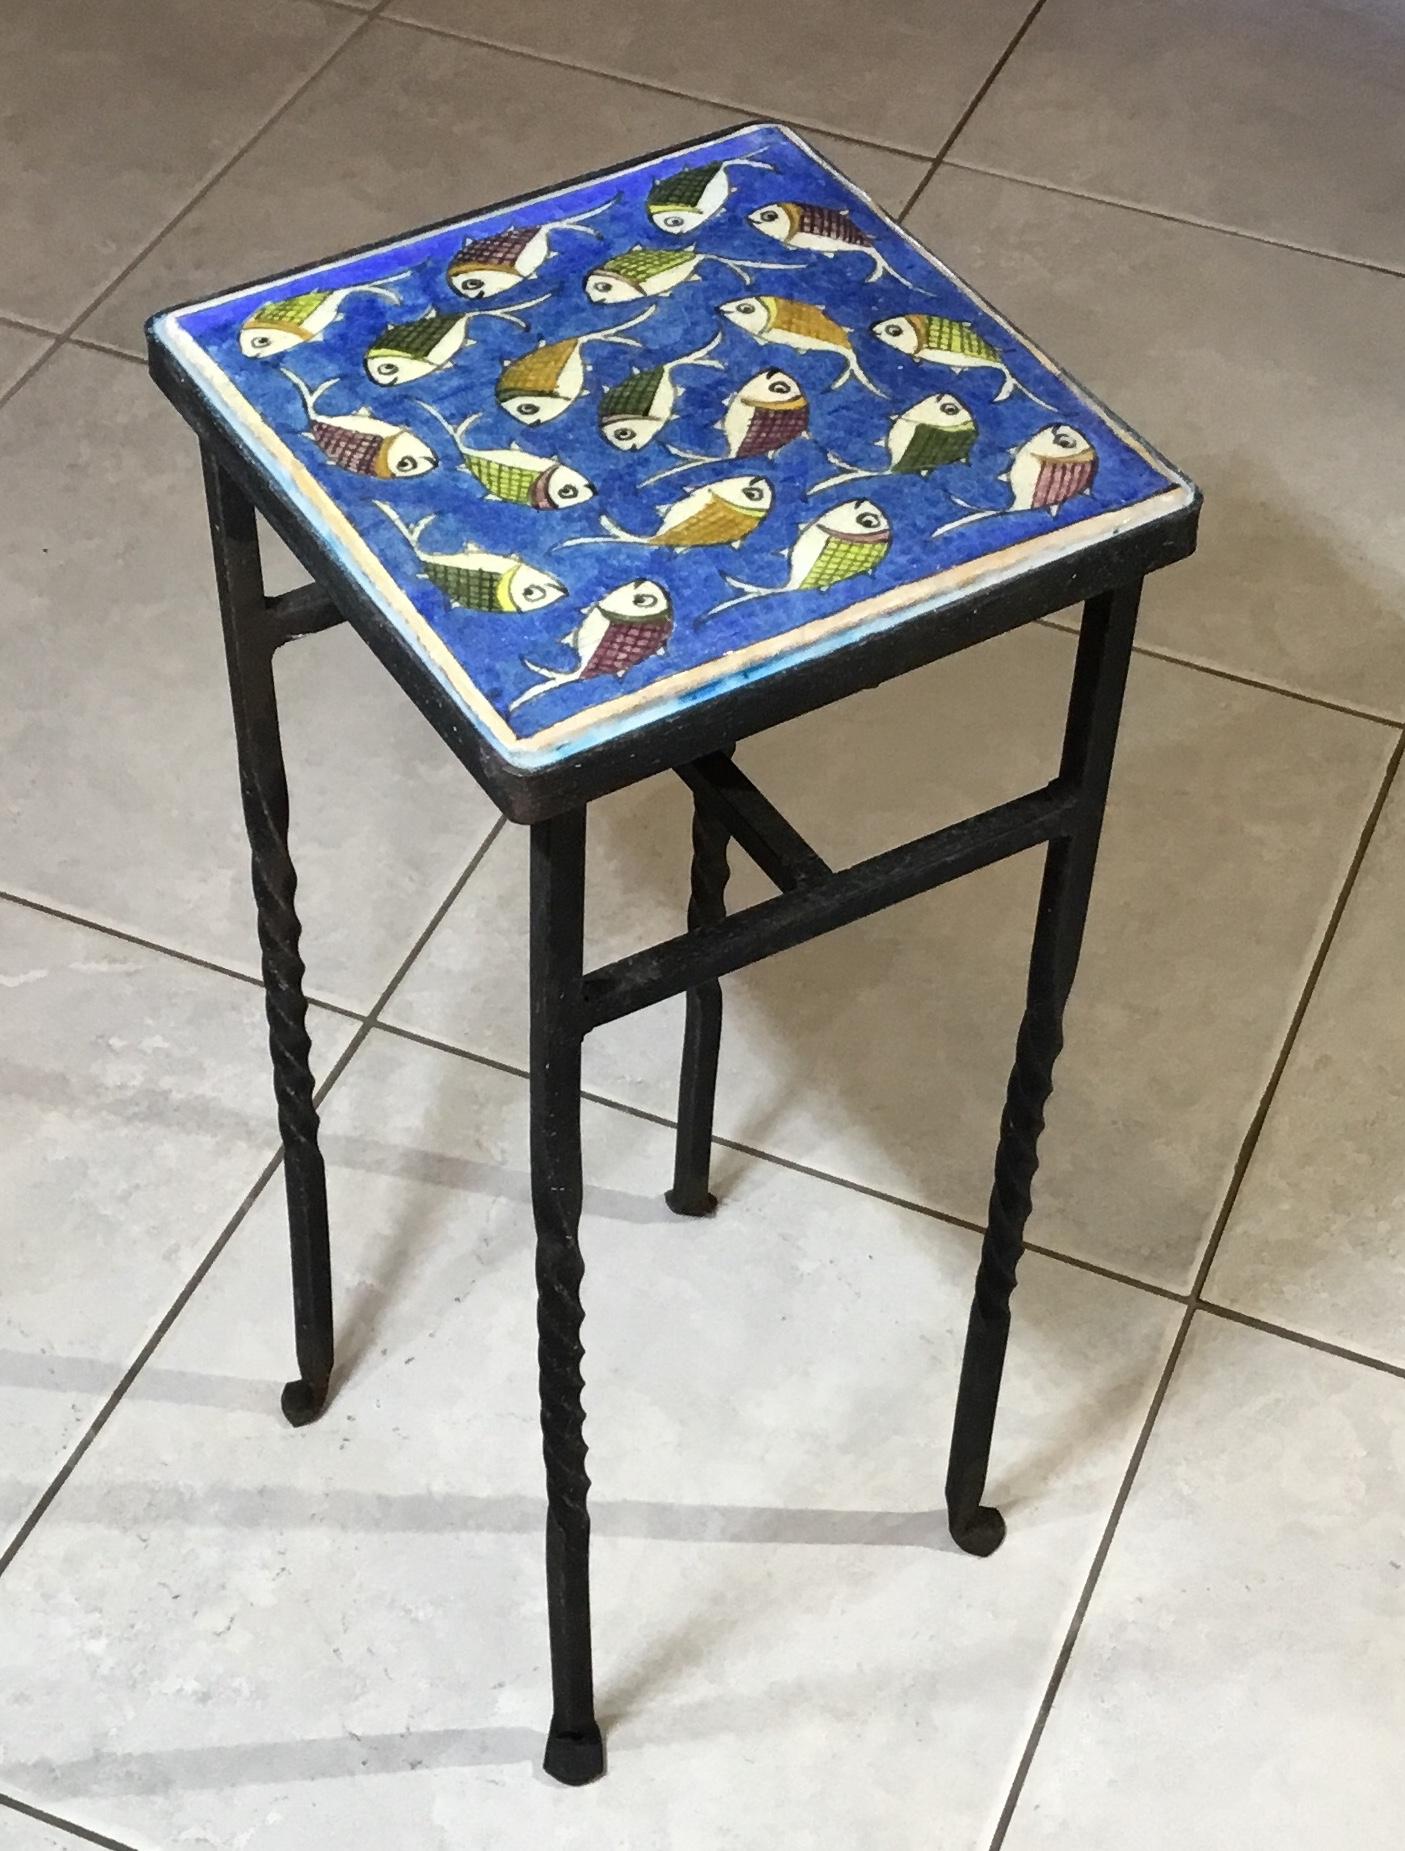 Elegant side table made of ceramic Persian tile top hand-painted and glazed of wondering school of fish on a beautiful blue background the base of the table made of iron with four hand twisted legs, very decorative and functional side table ,and